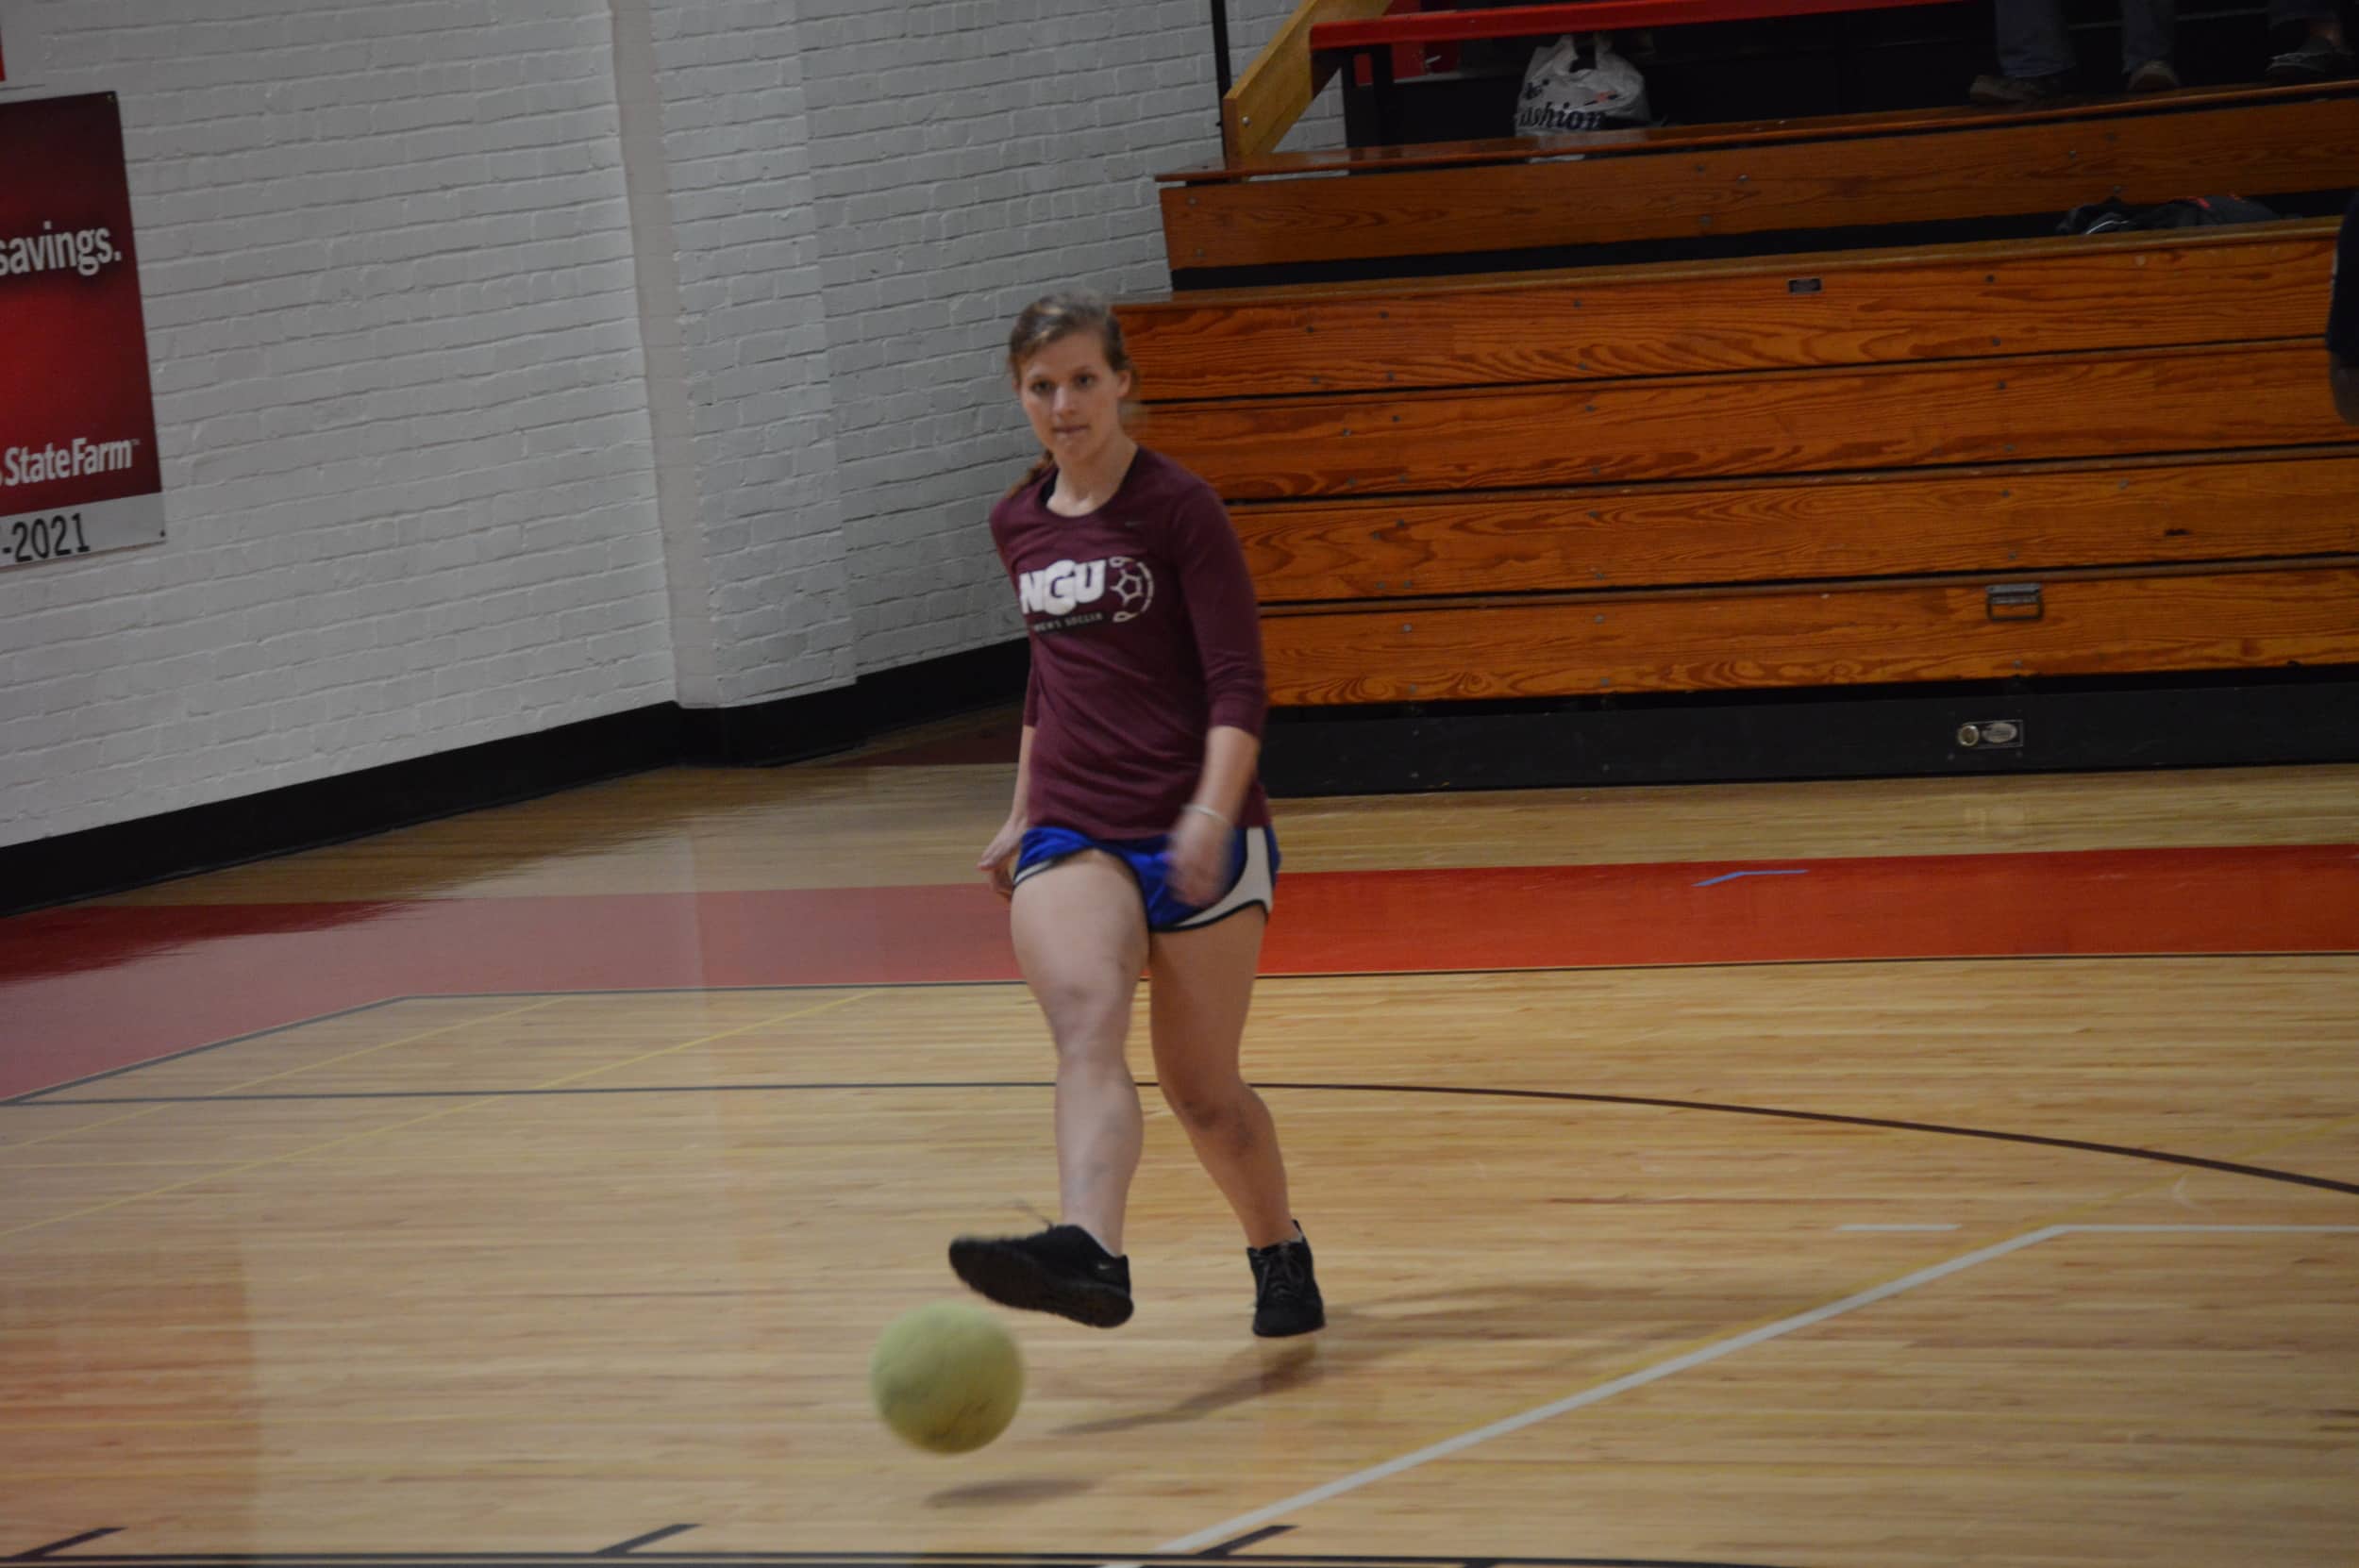 Passing the ball to her teammate,&nbsp;Kamryn Kelley is ready to win.